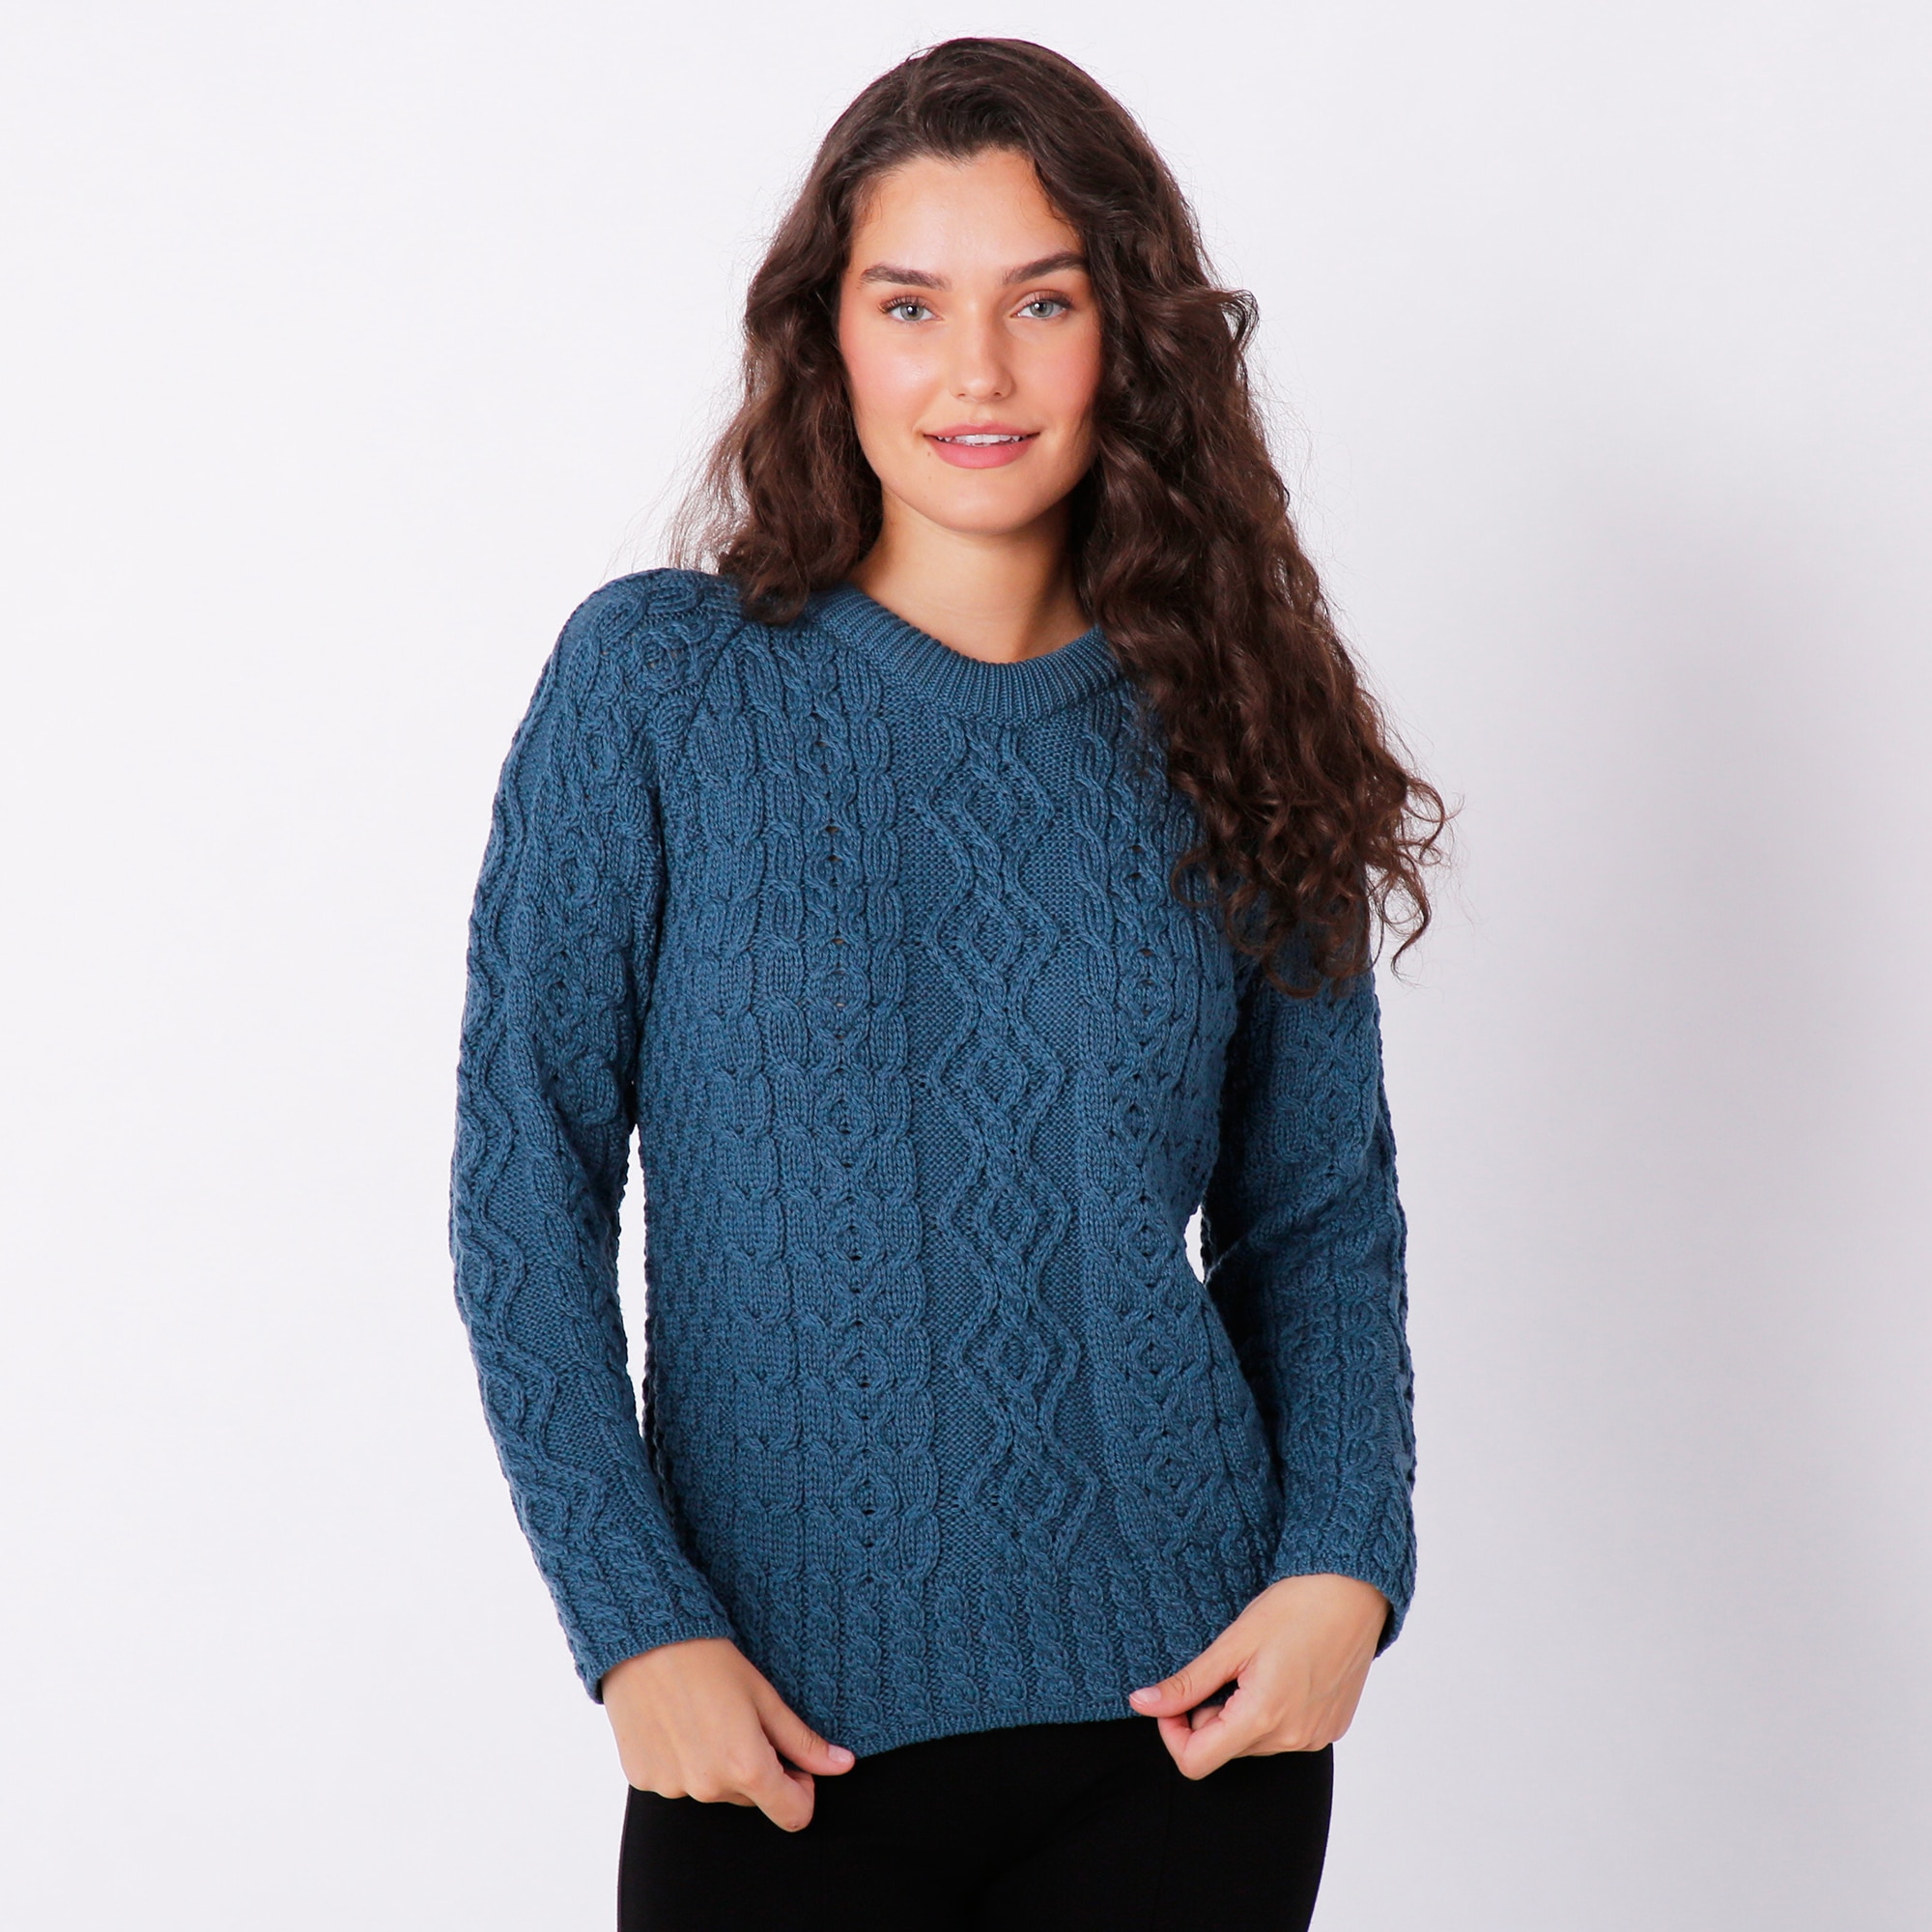 Clothing & Shoes - Tops - Sweaters & Cardigans - Pullovers - Aran